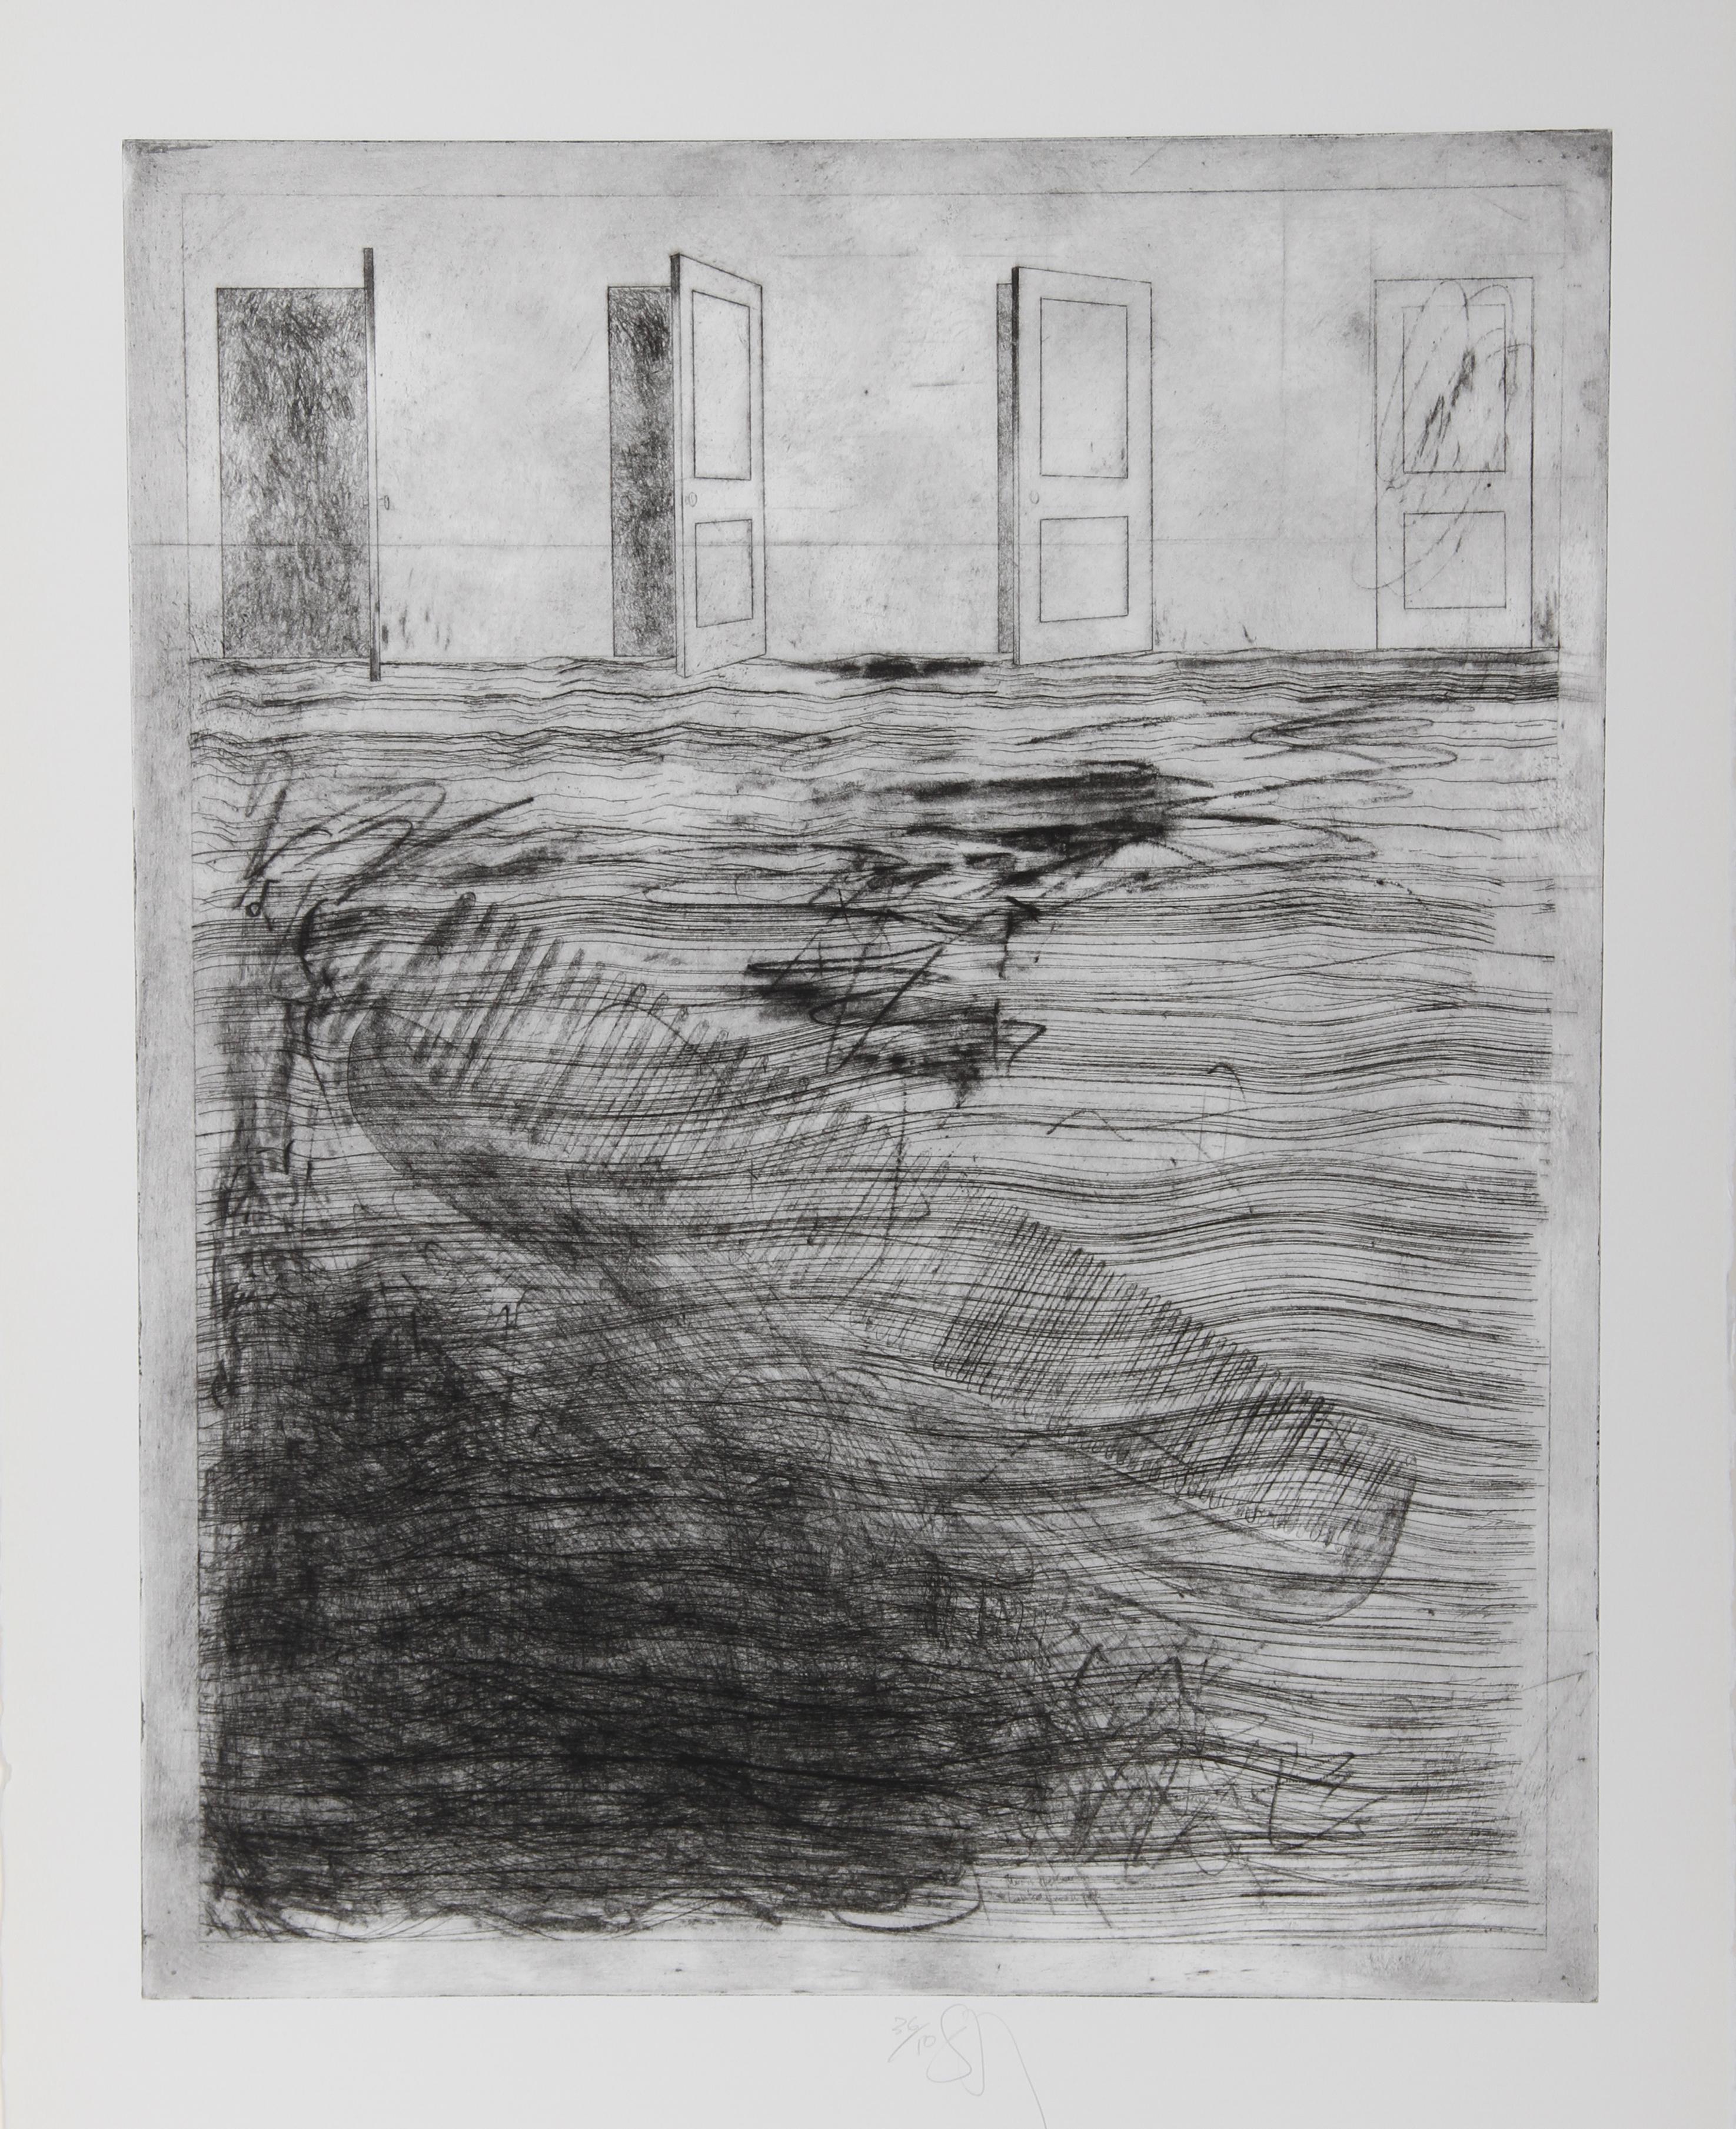 Four Doors by Donald Saff, American (1937)
Date: 1980
Etching, signed and numbered in pencil
Edition of 50
Image Size: 24 x 18 inches
Size: 30 in. x 22 in. (76.2 cm x 55.88 cm)